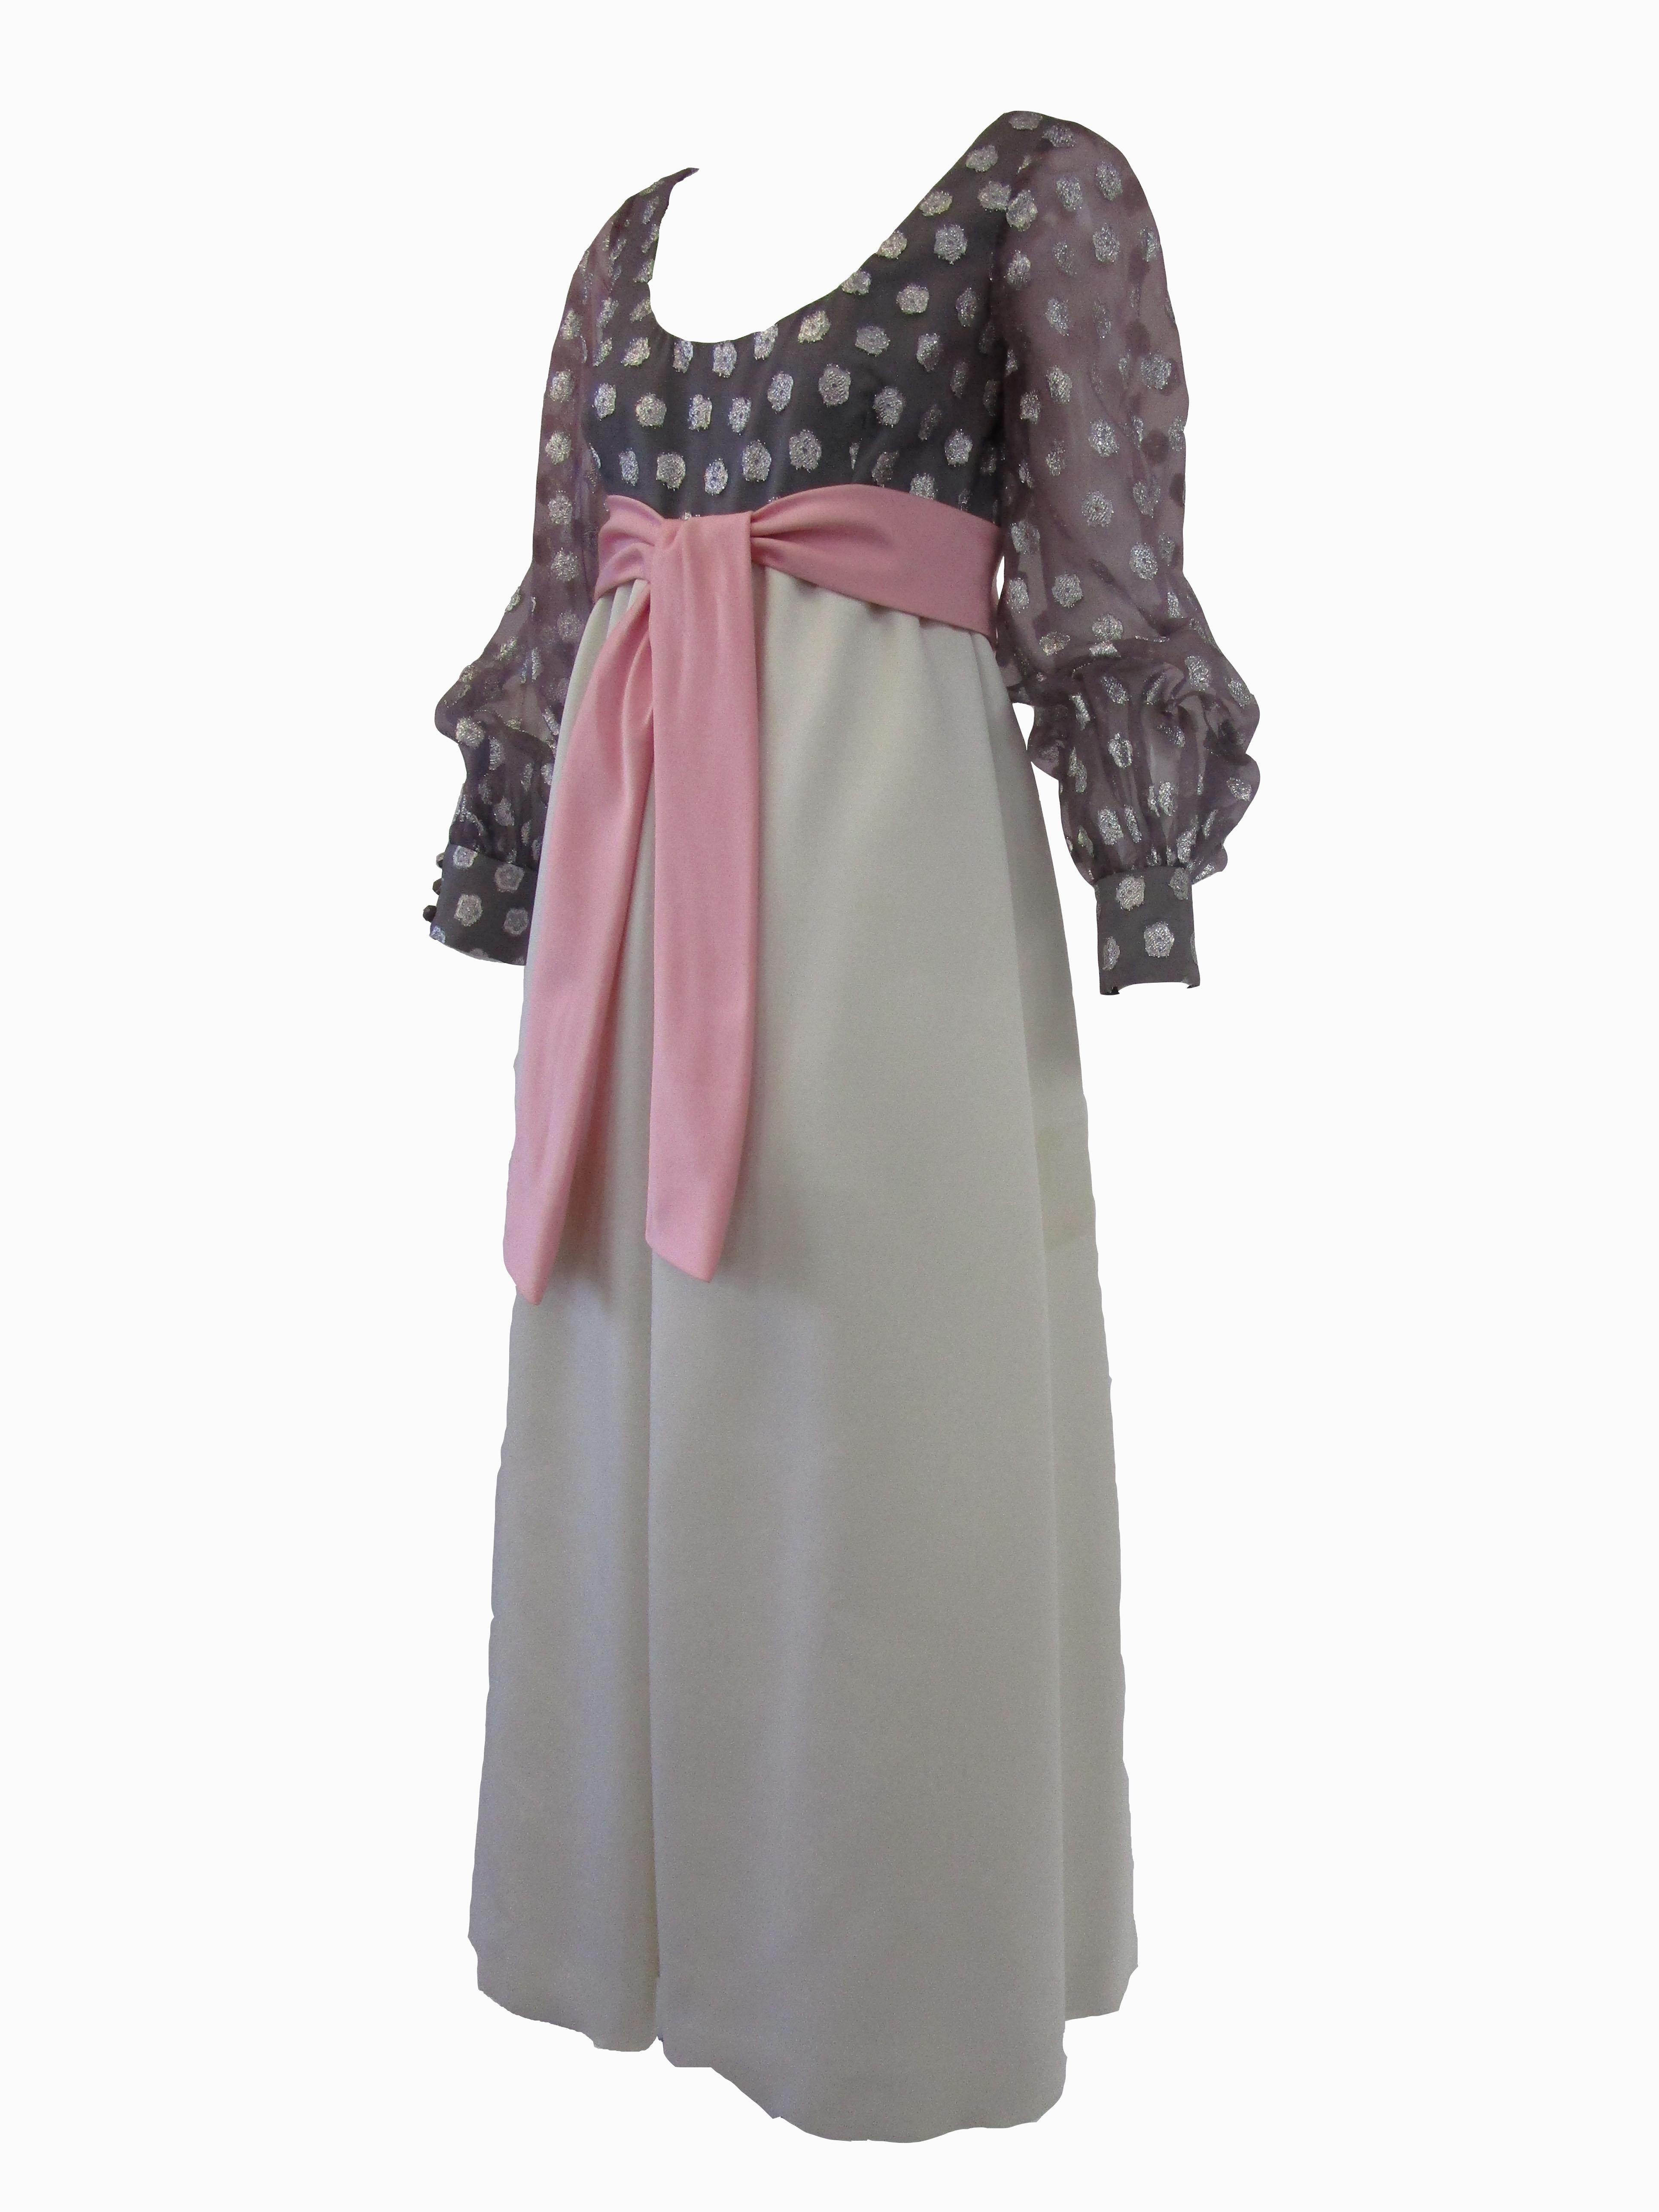 Youthful & fun scoop neck evening gown done in a sheer metallic polka dot over silk with a pink bow belt. Silk satin gathered skirt is an off white. Sheer sleeves button at cuff. Zips at back. All lined in silk.

Geoffrey Beene began his career in